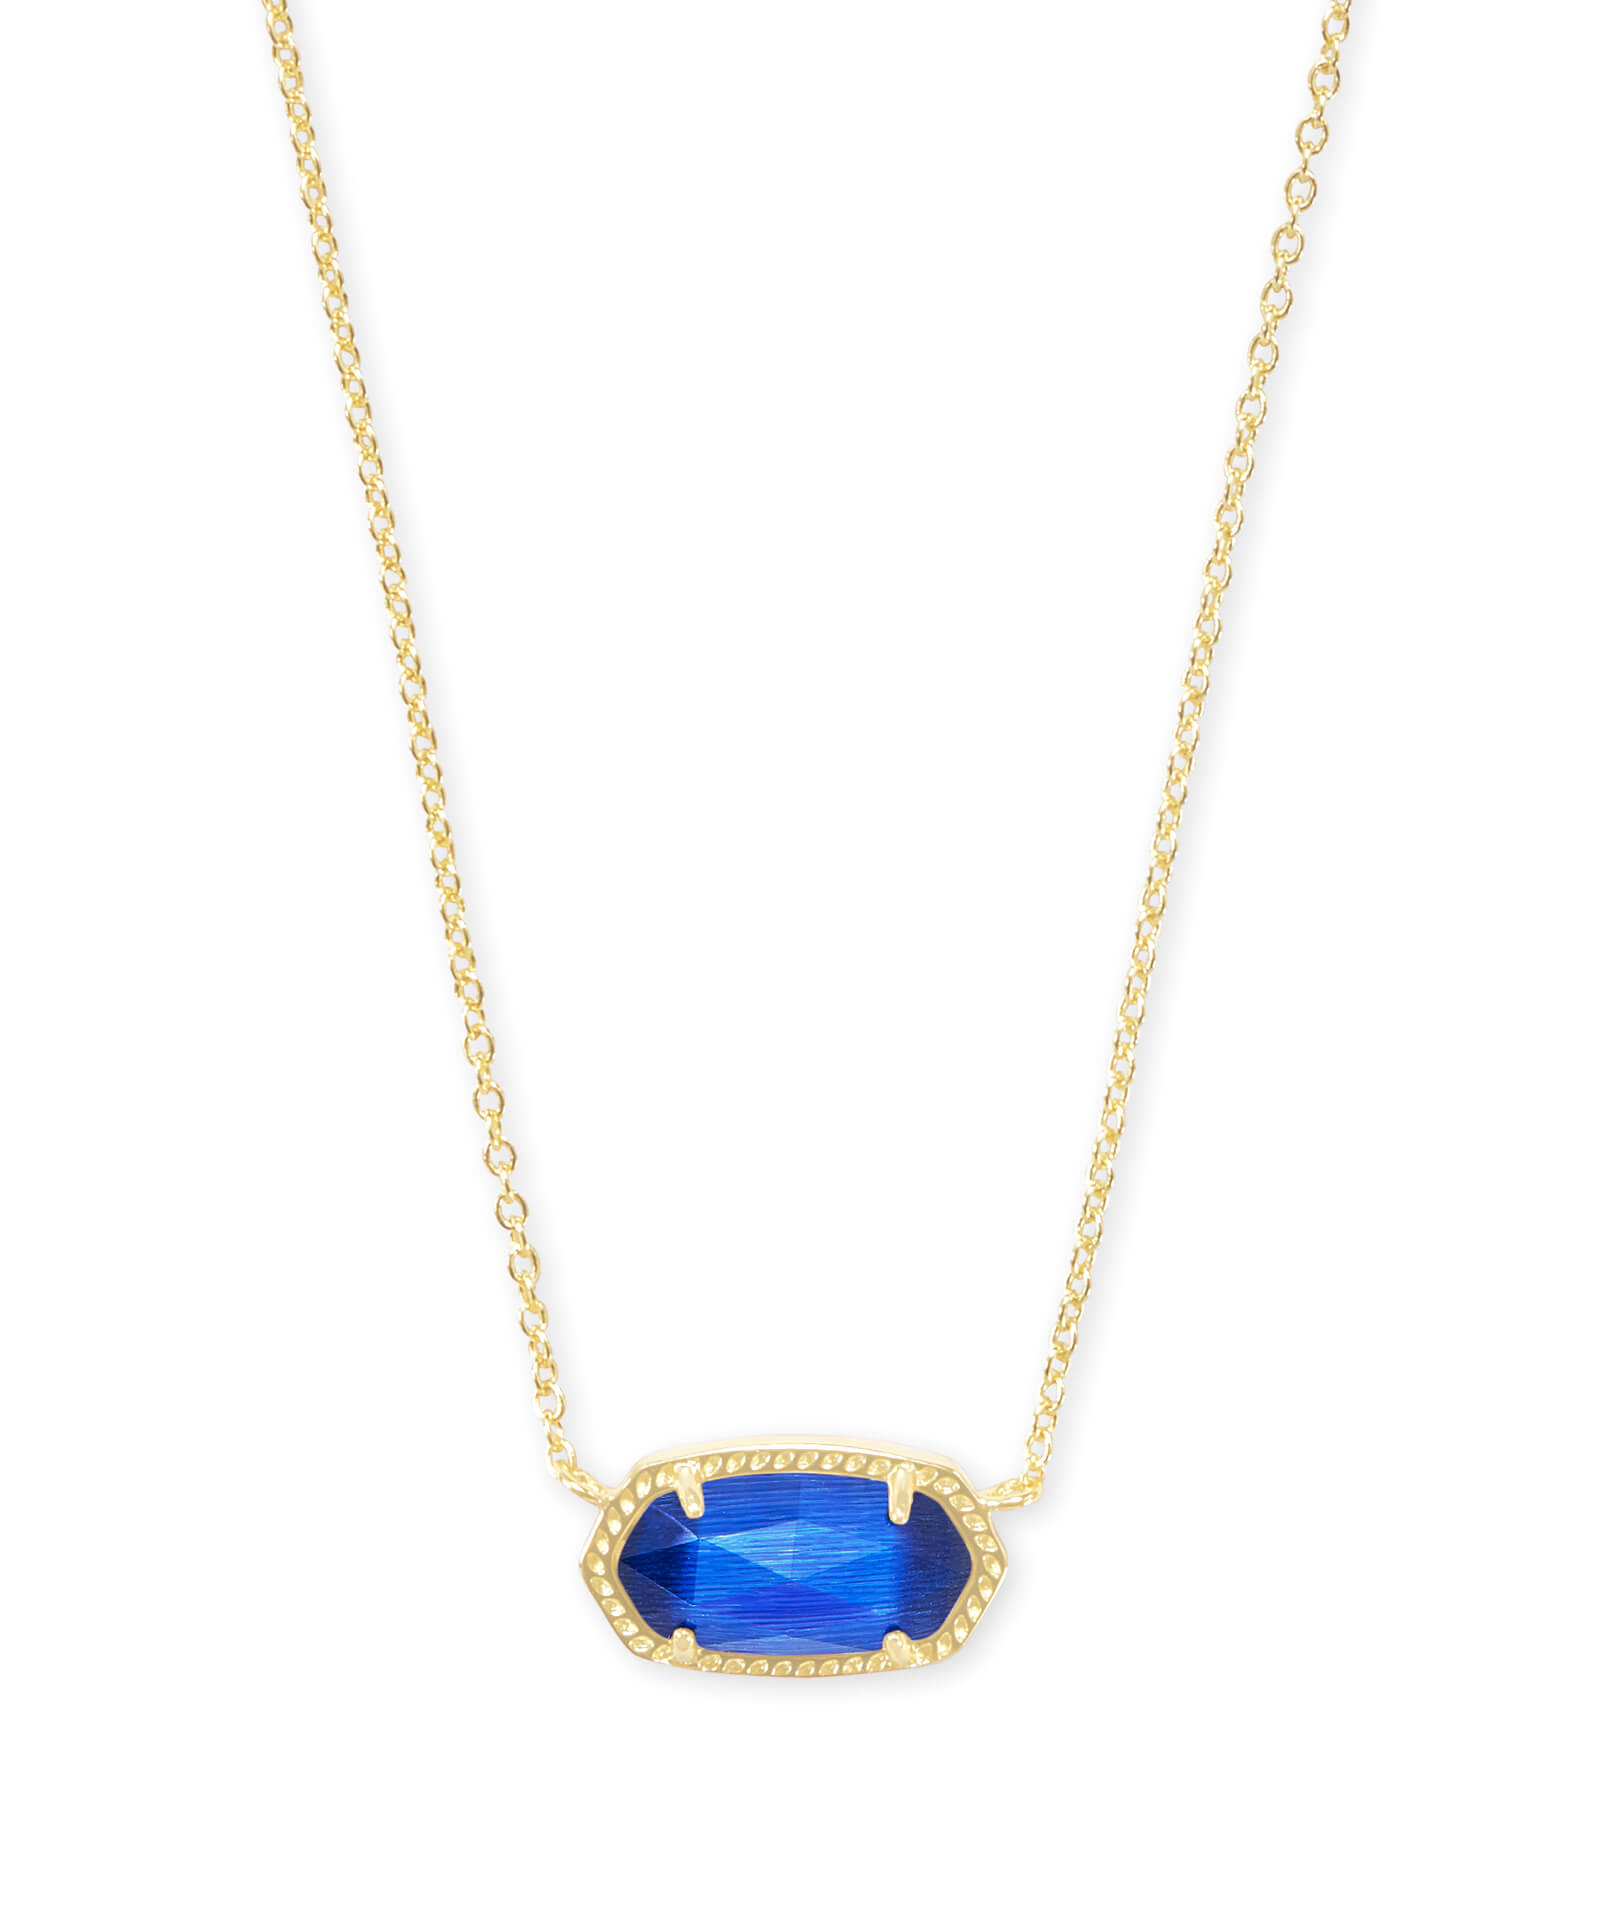 KENDRA SCOTT ELISA COLLECTION14K YELLOW GOLD PLATED BRASS FASHION NECKLACE SIZE 19 COBALT CATS EYE